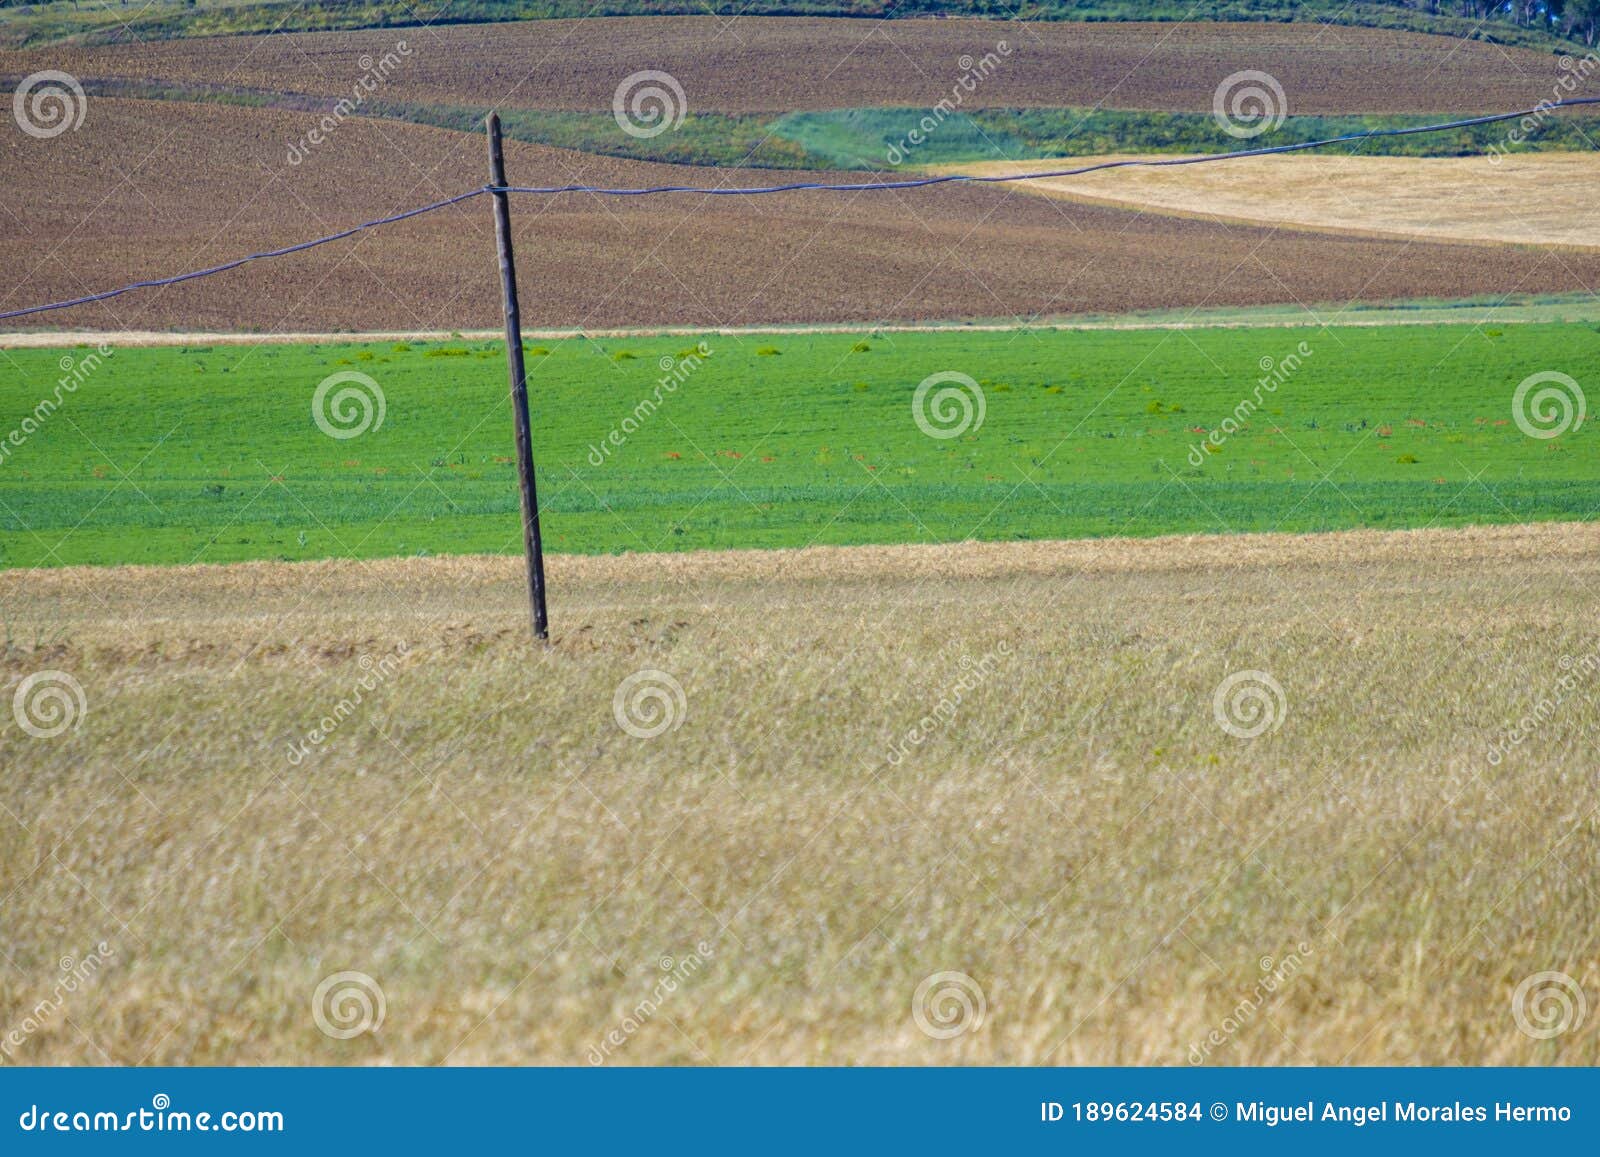 cultivated fields, especially cereals, in the interior spain